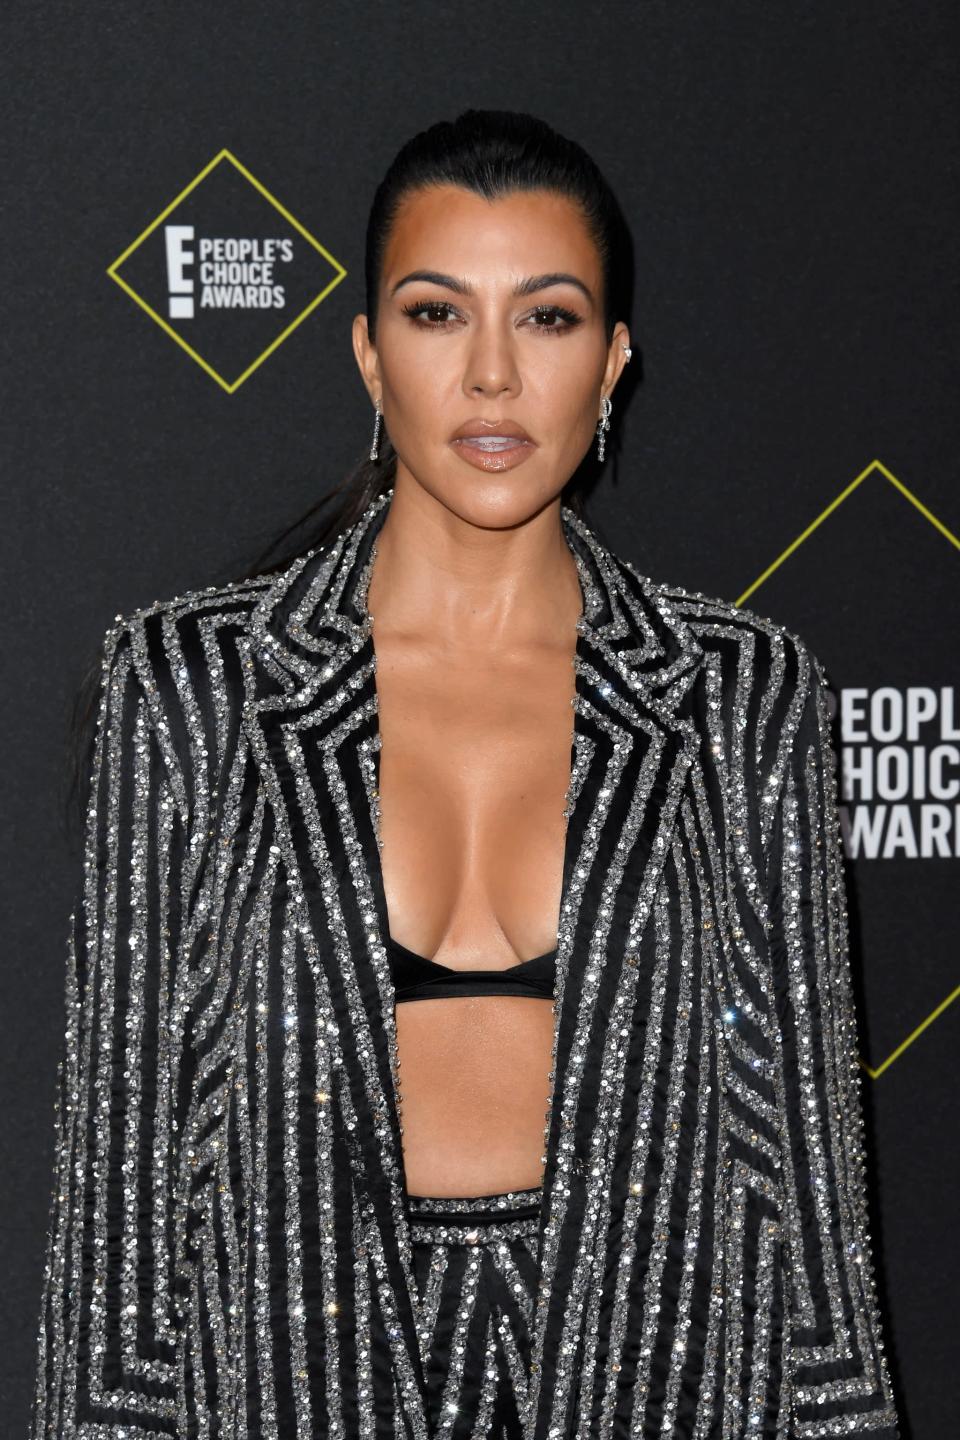 <p>In 2010, Kourtney Kardashian told <strong>Nightline</strong> that <a href="http://abcnews.go.com/Nightline/kardashians-nightline-interview/story?id=10689693" class="link rapid-noclick-resp" rel="nofollow noopener" target="_blank" data-ylk="slk:she's had her breast done">she's had her breast done</a>, but she wasn't ashamed about having the procedure done at all. "I have had breast implants, but it's so funny 'cause it's not a secret, I could care less," she said.</p>